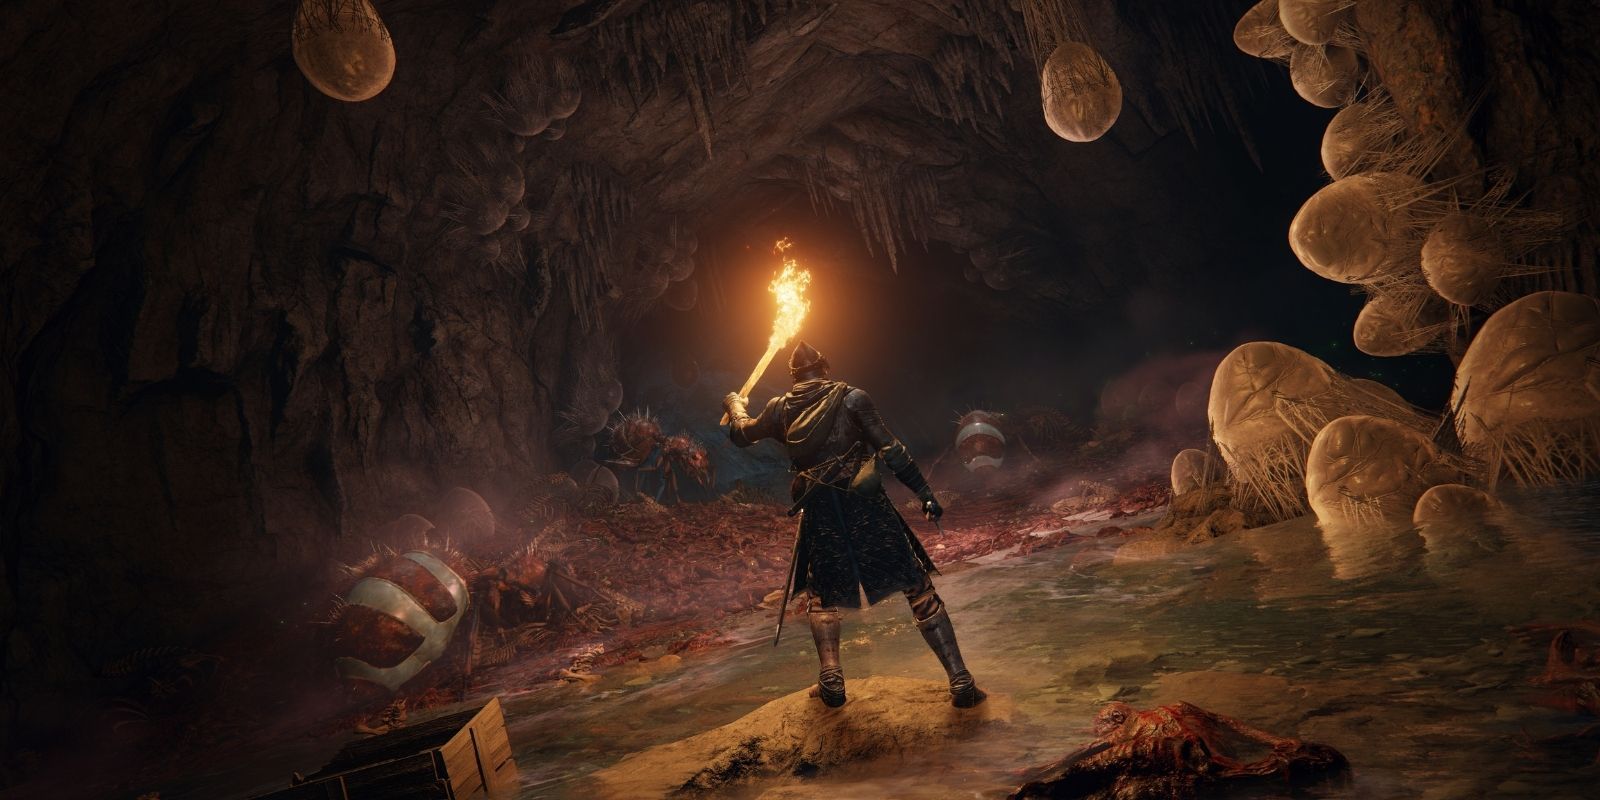 A character in Elden Ring lighting up a cavern with a torch